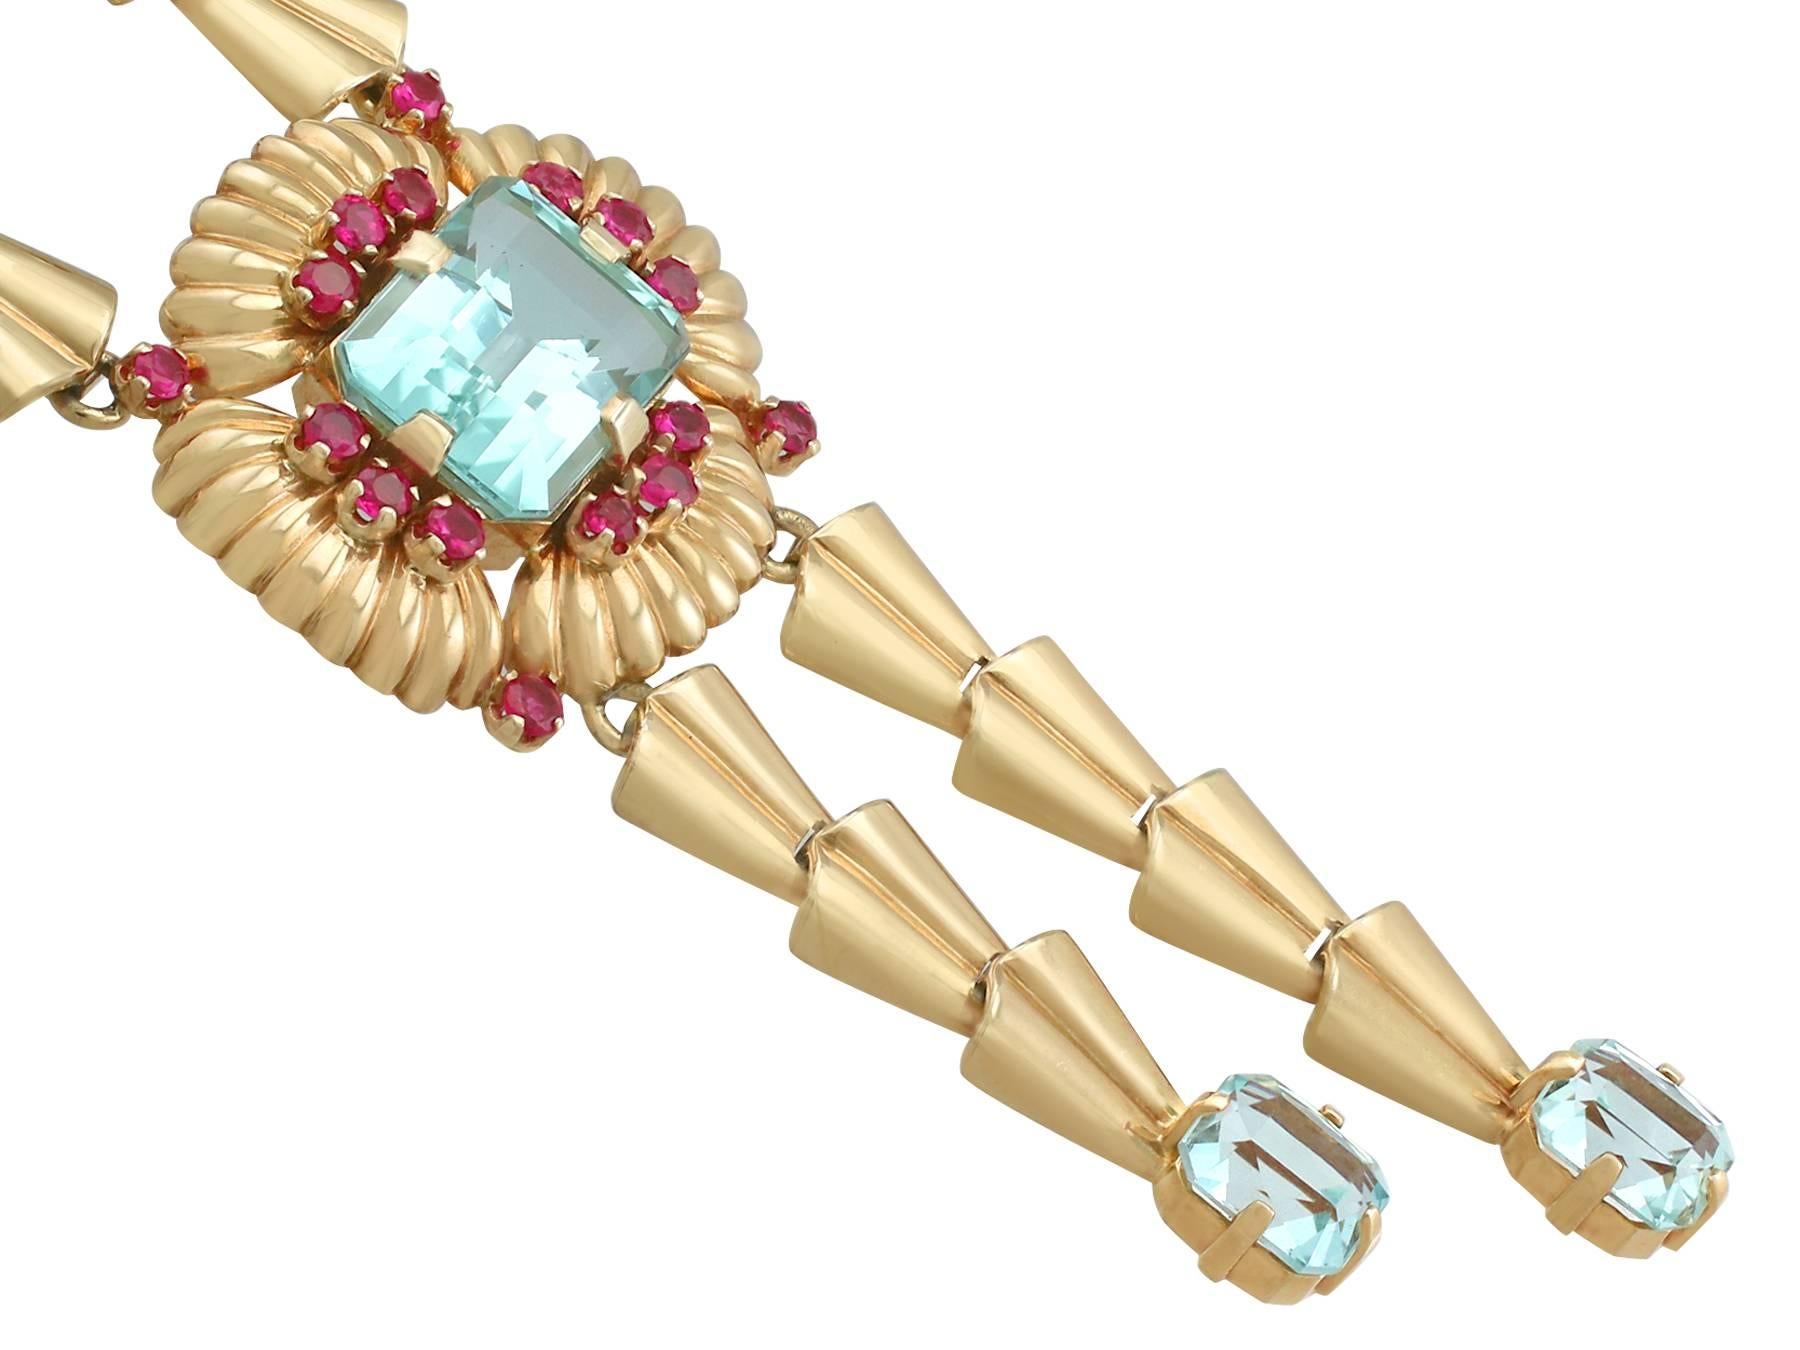 Art Deco 15.84 Carat Aquamarine and 1.28 Carat Ruby, Gold Necklace by Tiffany & Co.